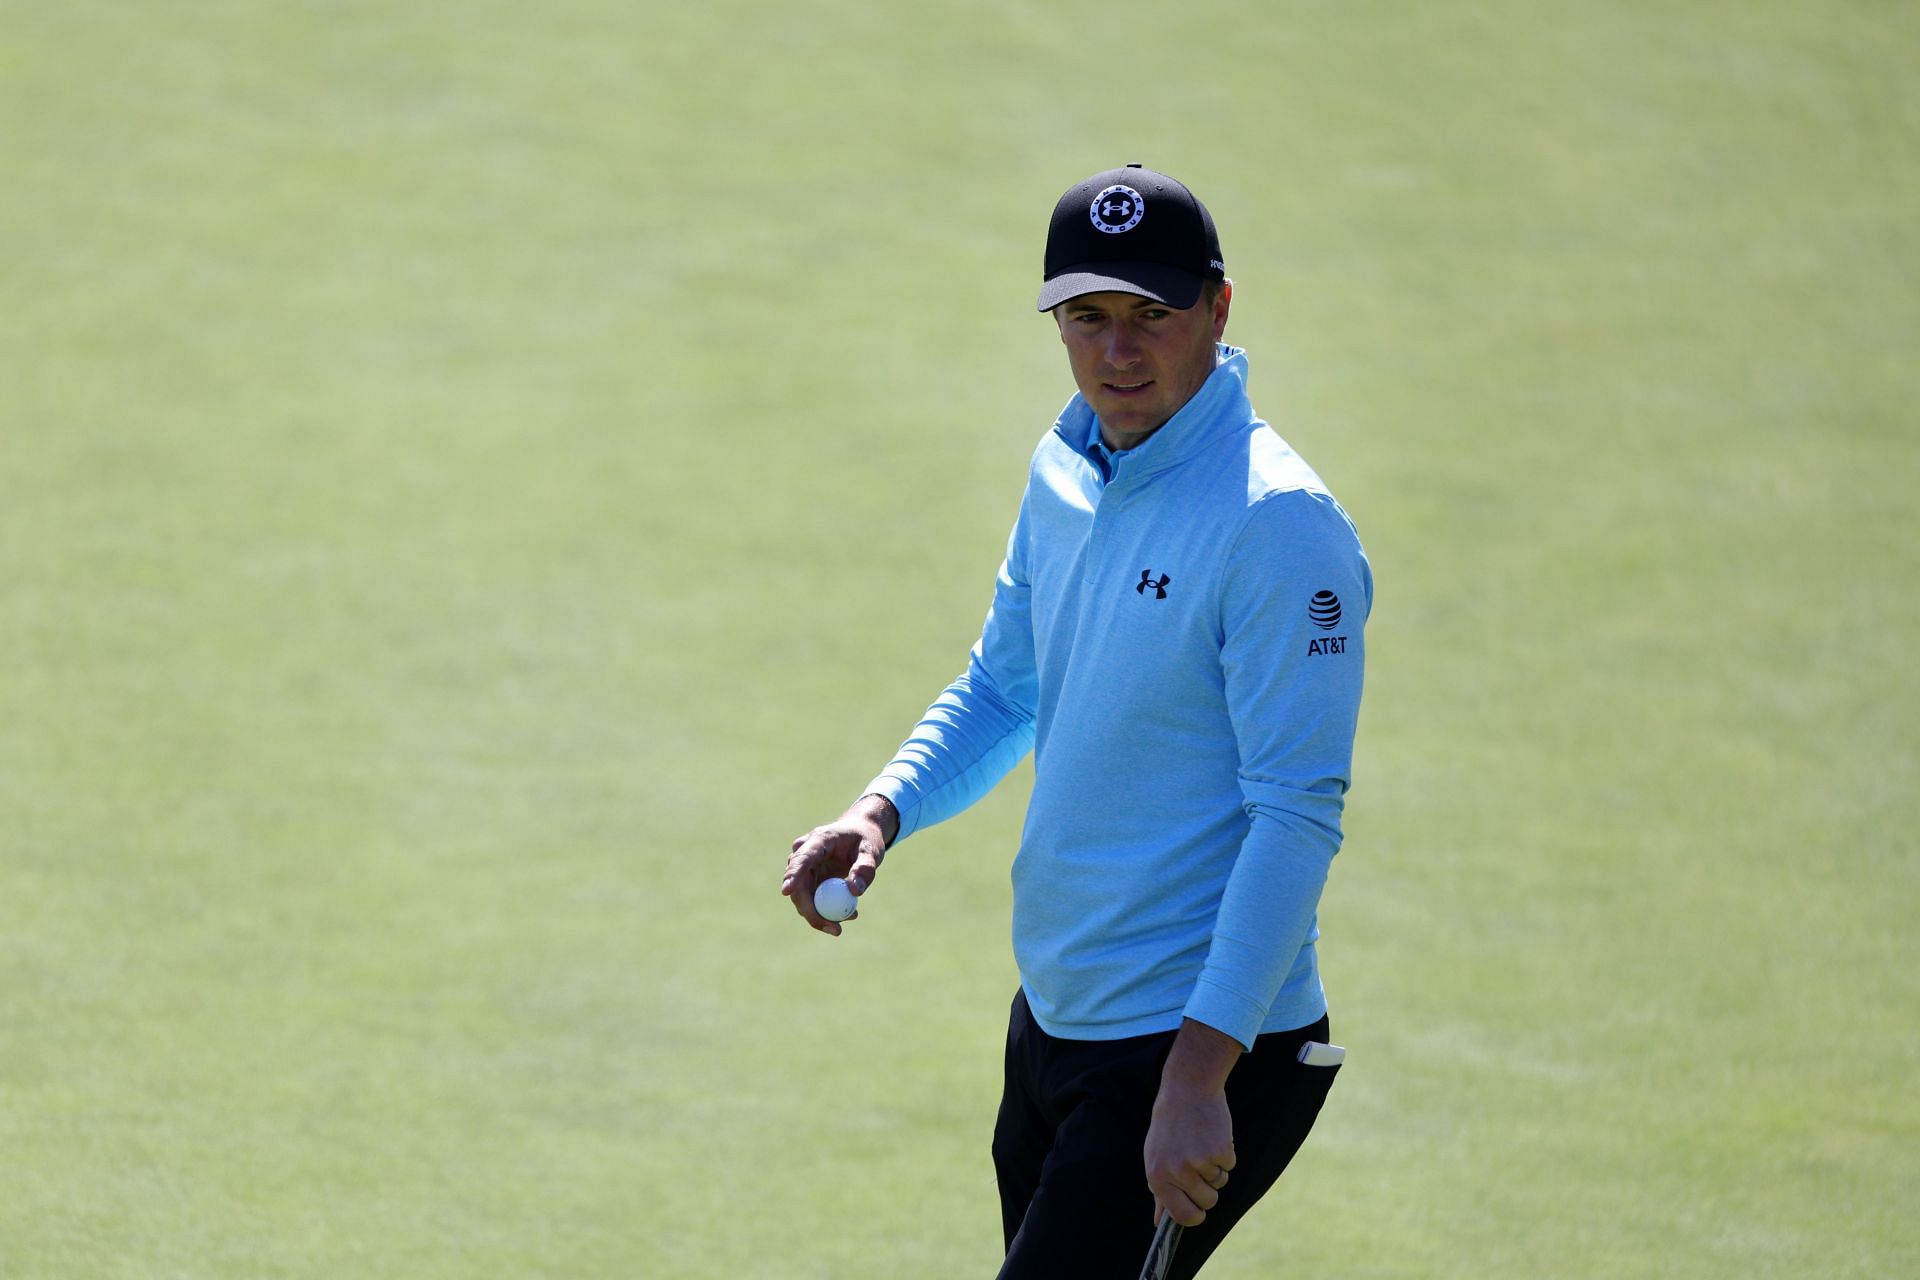 Jordan Spieth&#039;s disqualification calls for a rule change